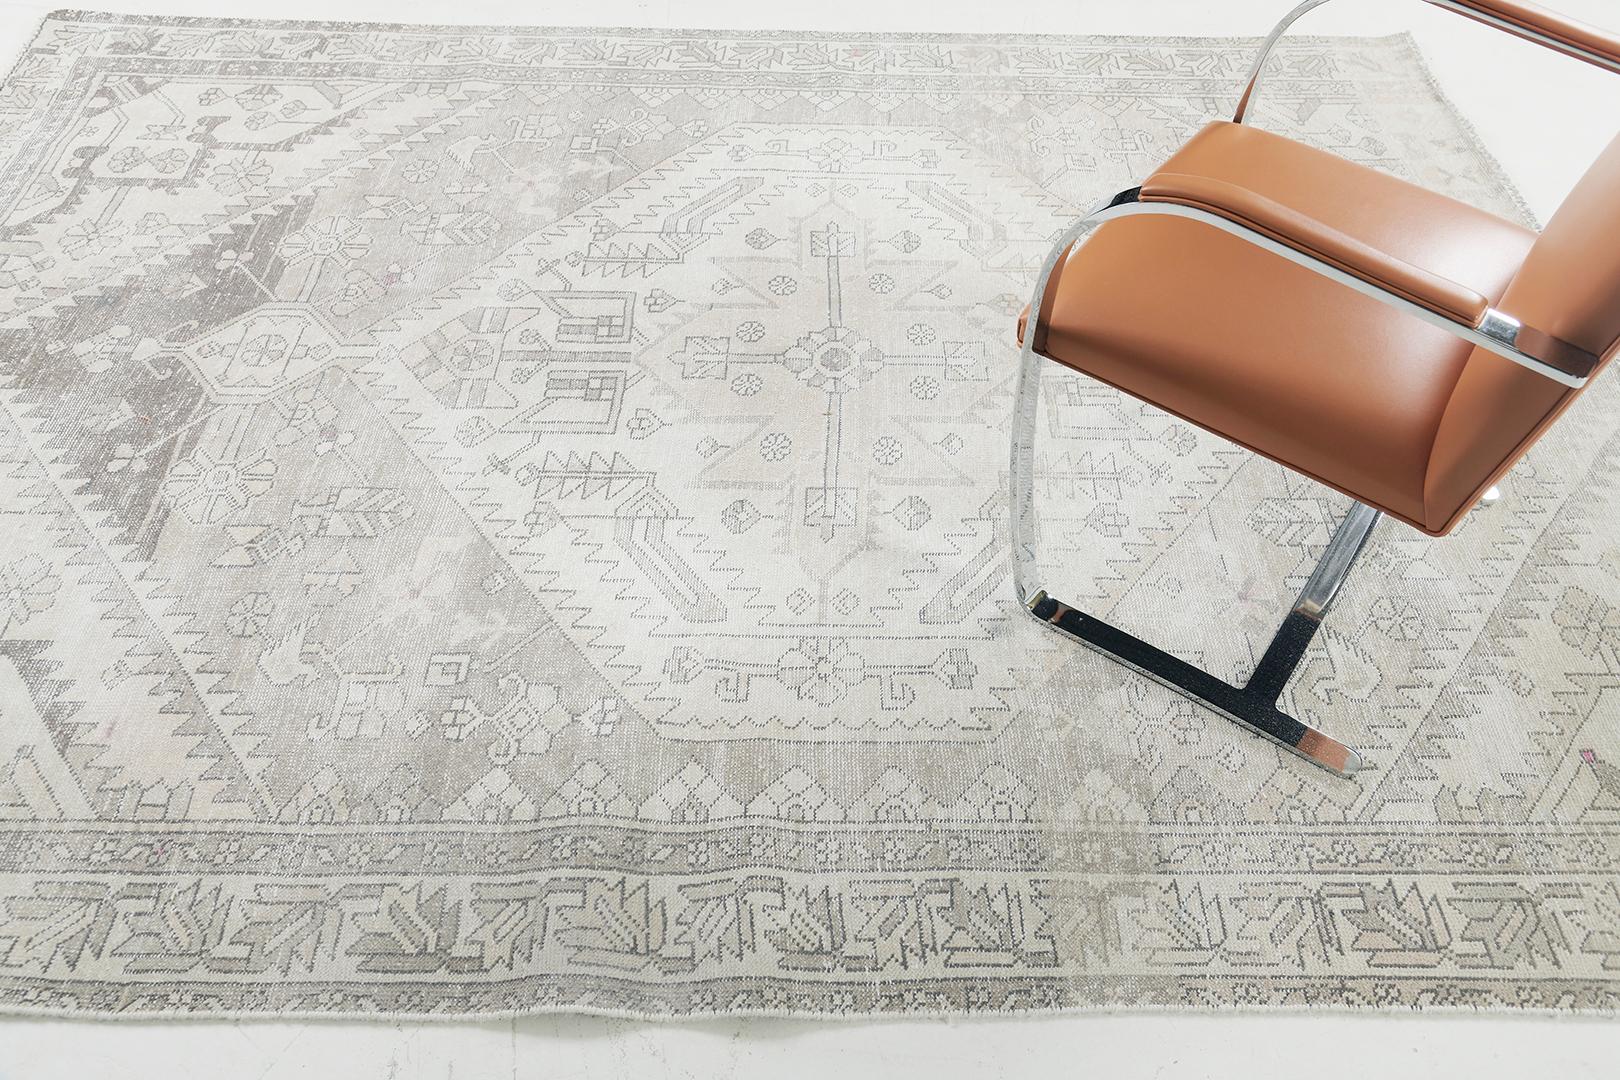 Revealing the magnificent art form, this mesmerizing rug will definitely fascinate you upon laying your eyes on this Vintage Persian Bakhtiari Rug. Rendered in the soothing neutral tones, this rug creates breathtaking geometrical patterns that